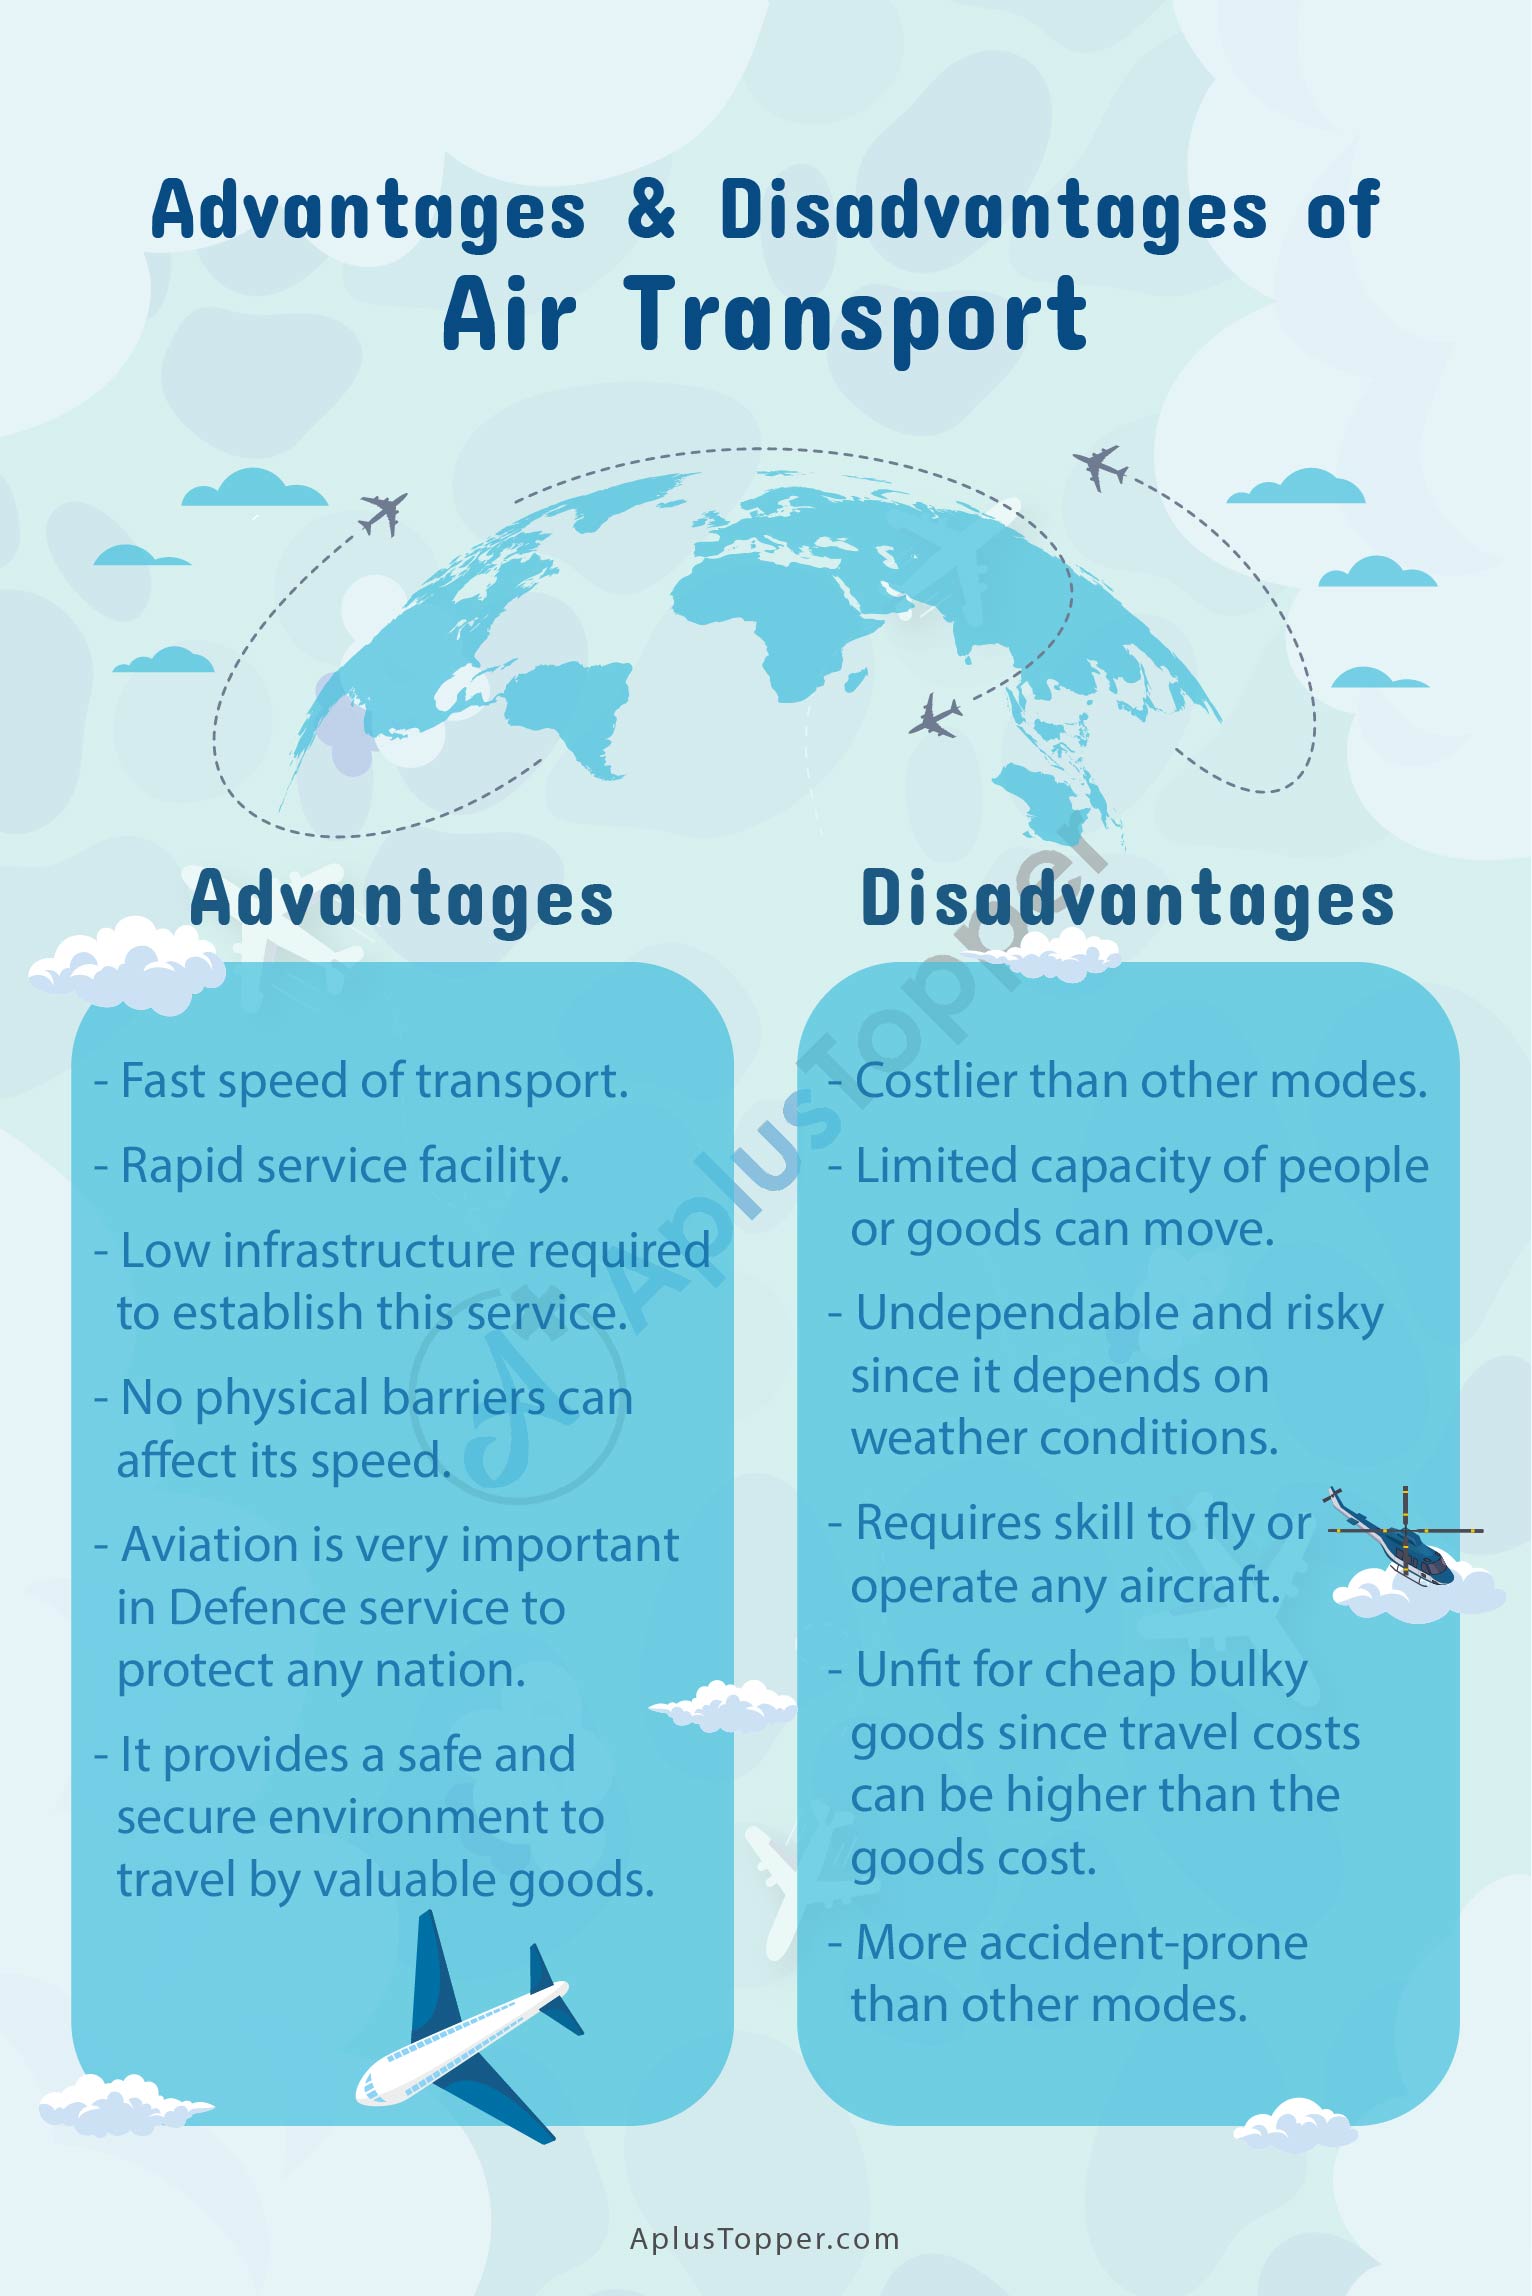 Advantages and Disadvantages of Air Transport 2